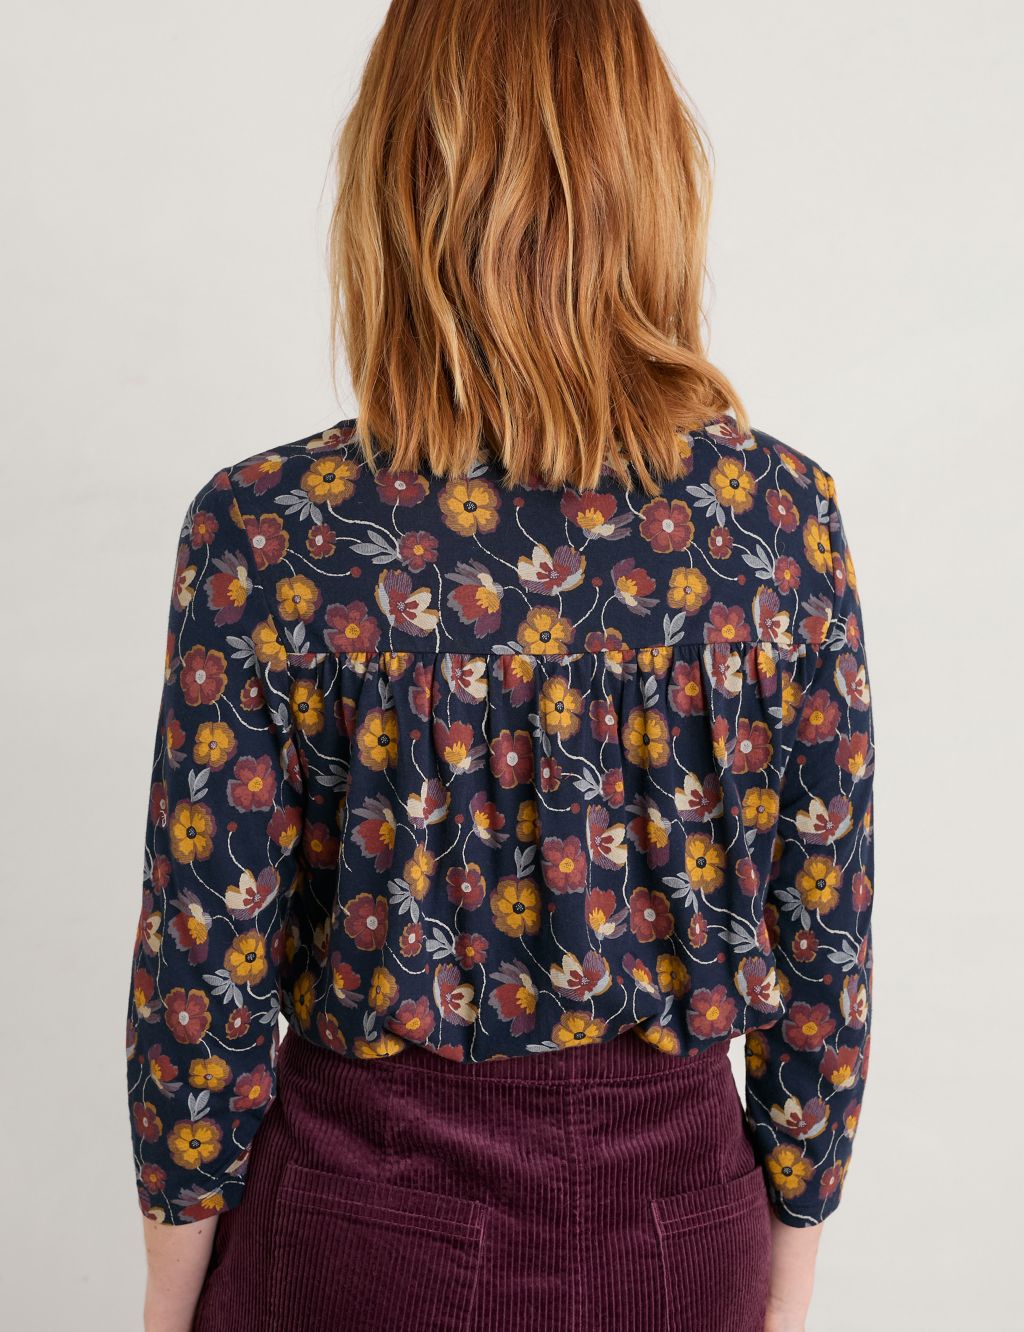 Jersey Floral Top image 4